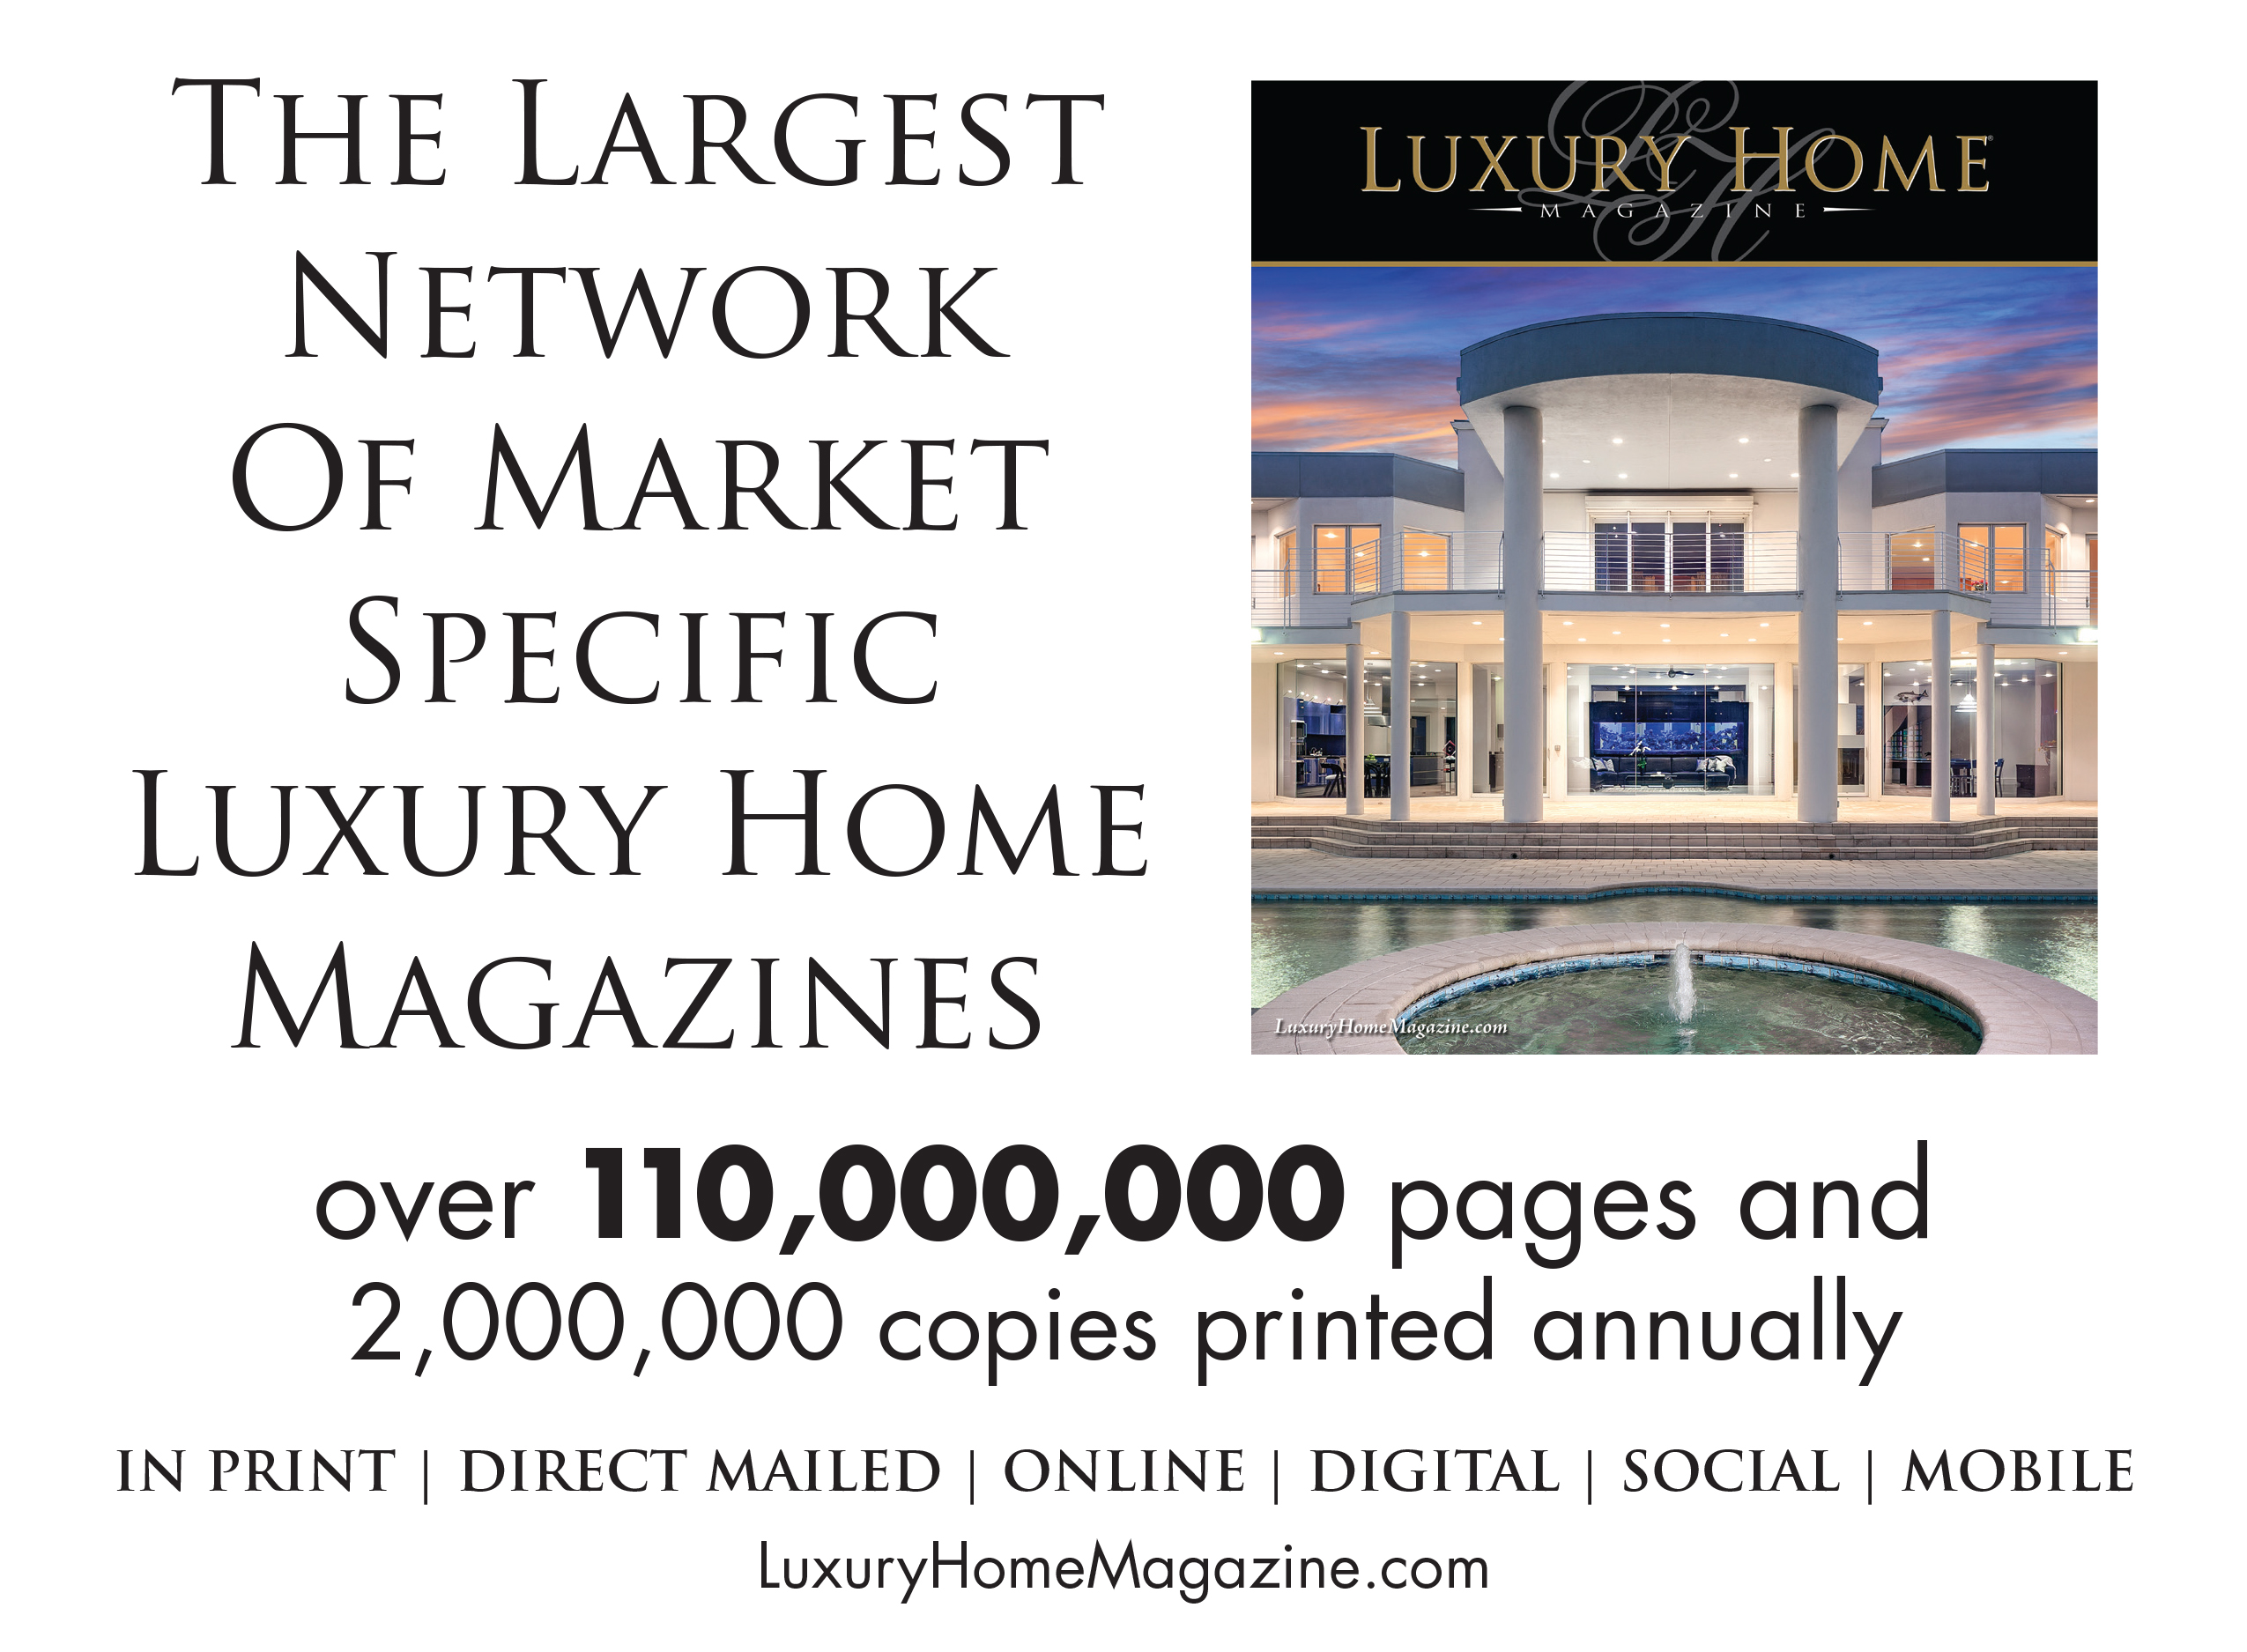 The Largest Network of Market Specific Luxury Home Magazines